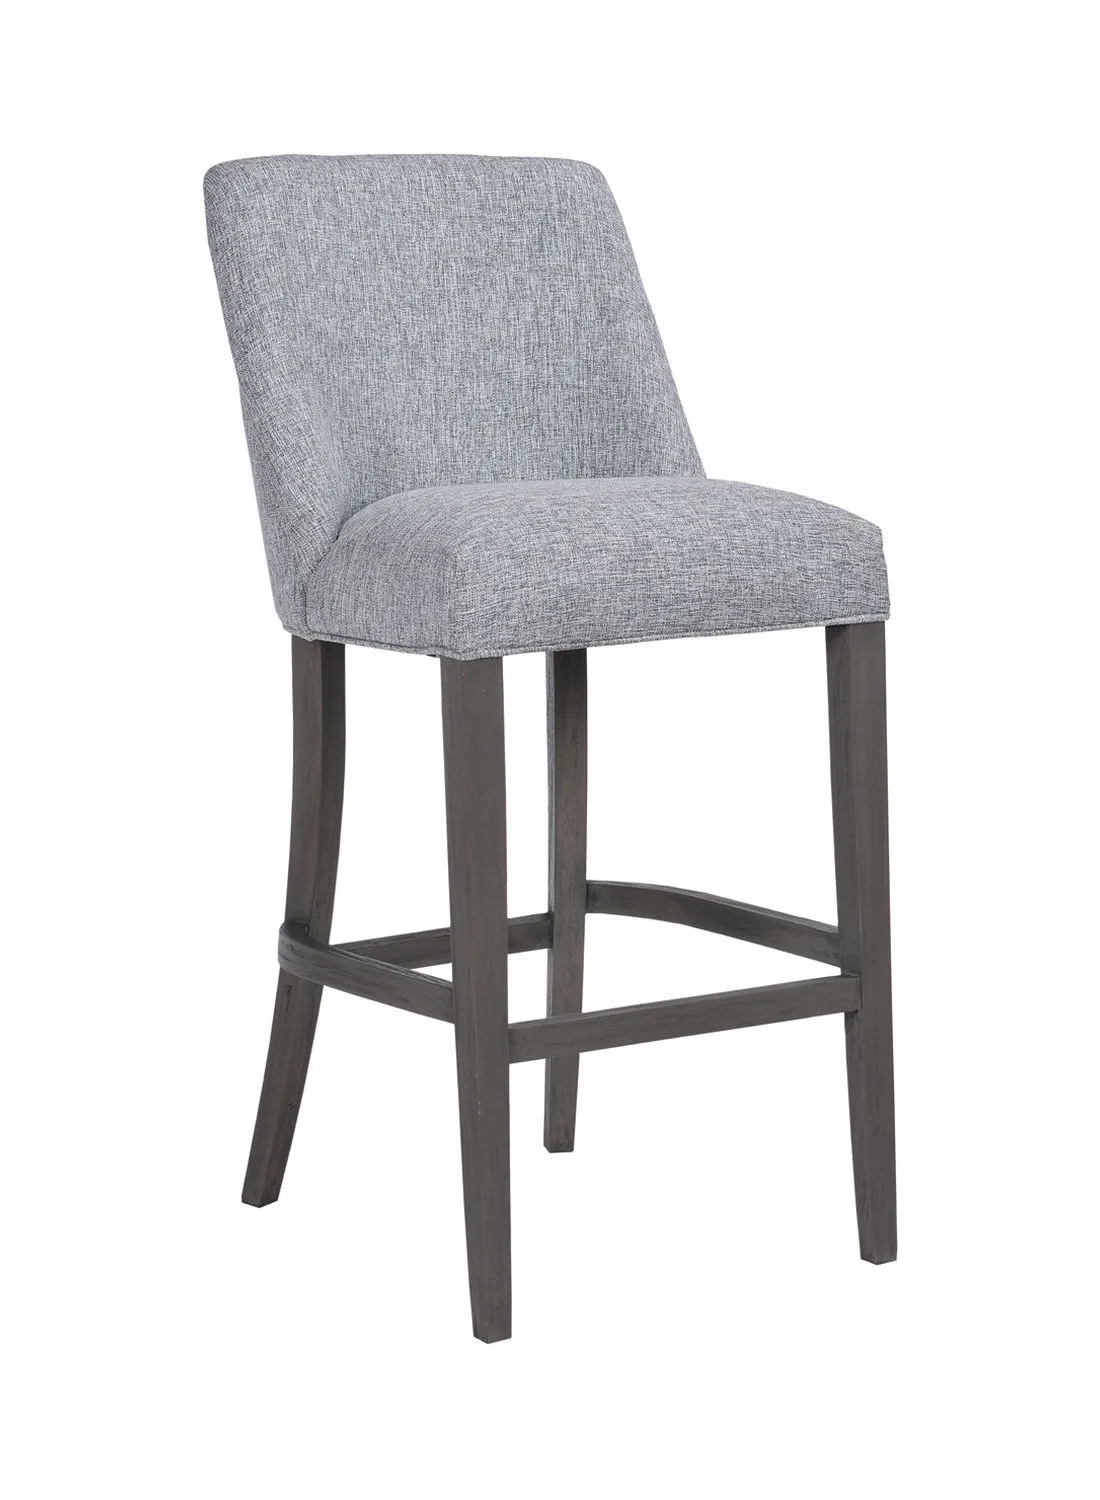 ebb & flow Dining Chair Luxurious - In Oak/Grey Wooden Chair Size 49.5 X 57 X 112